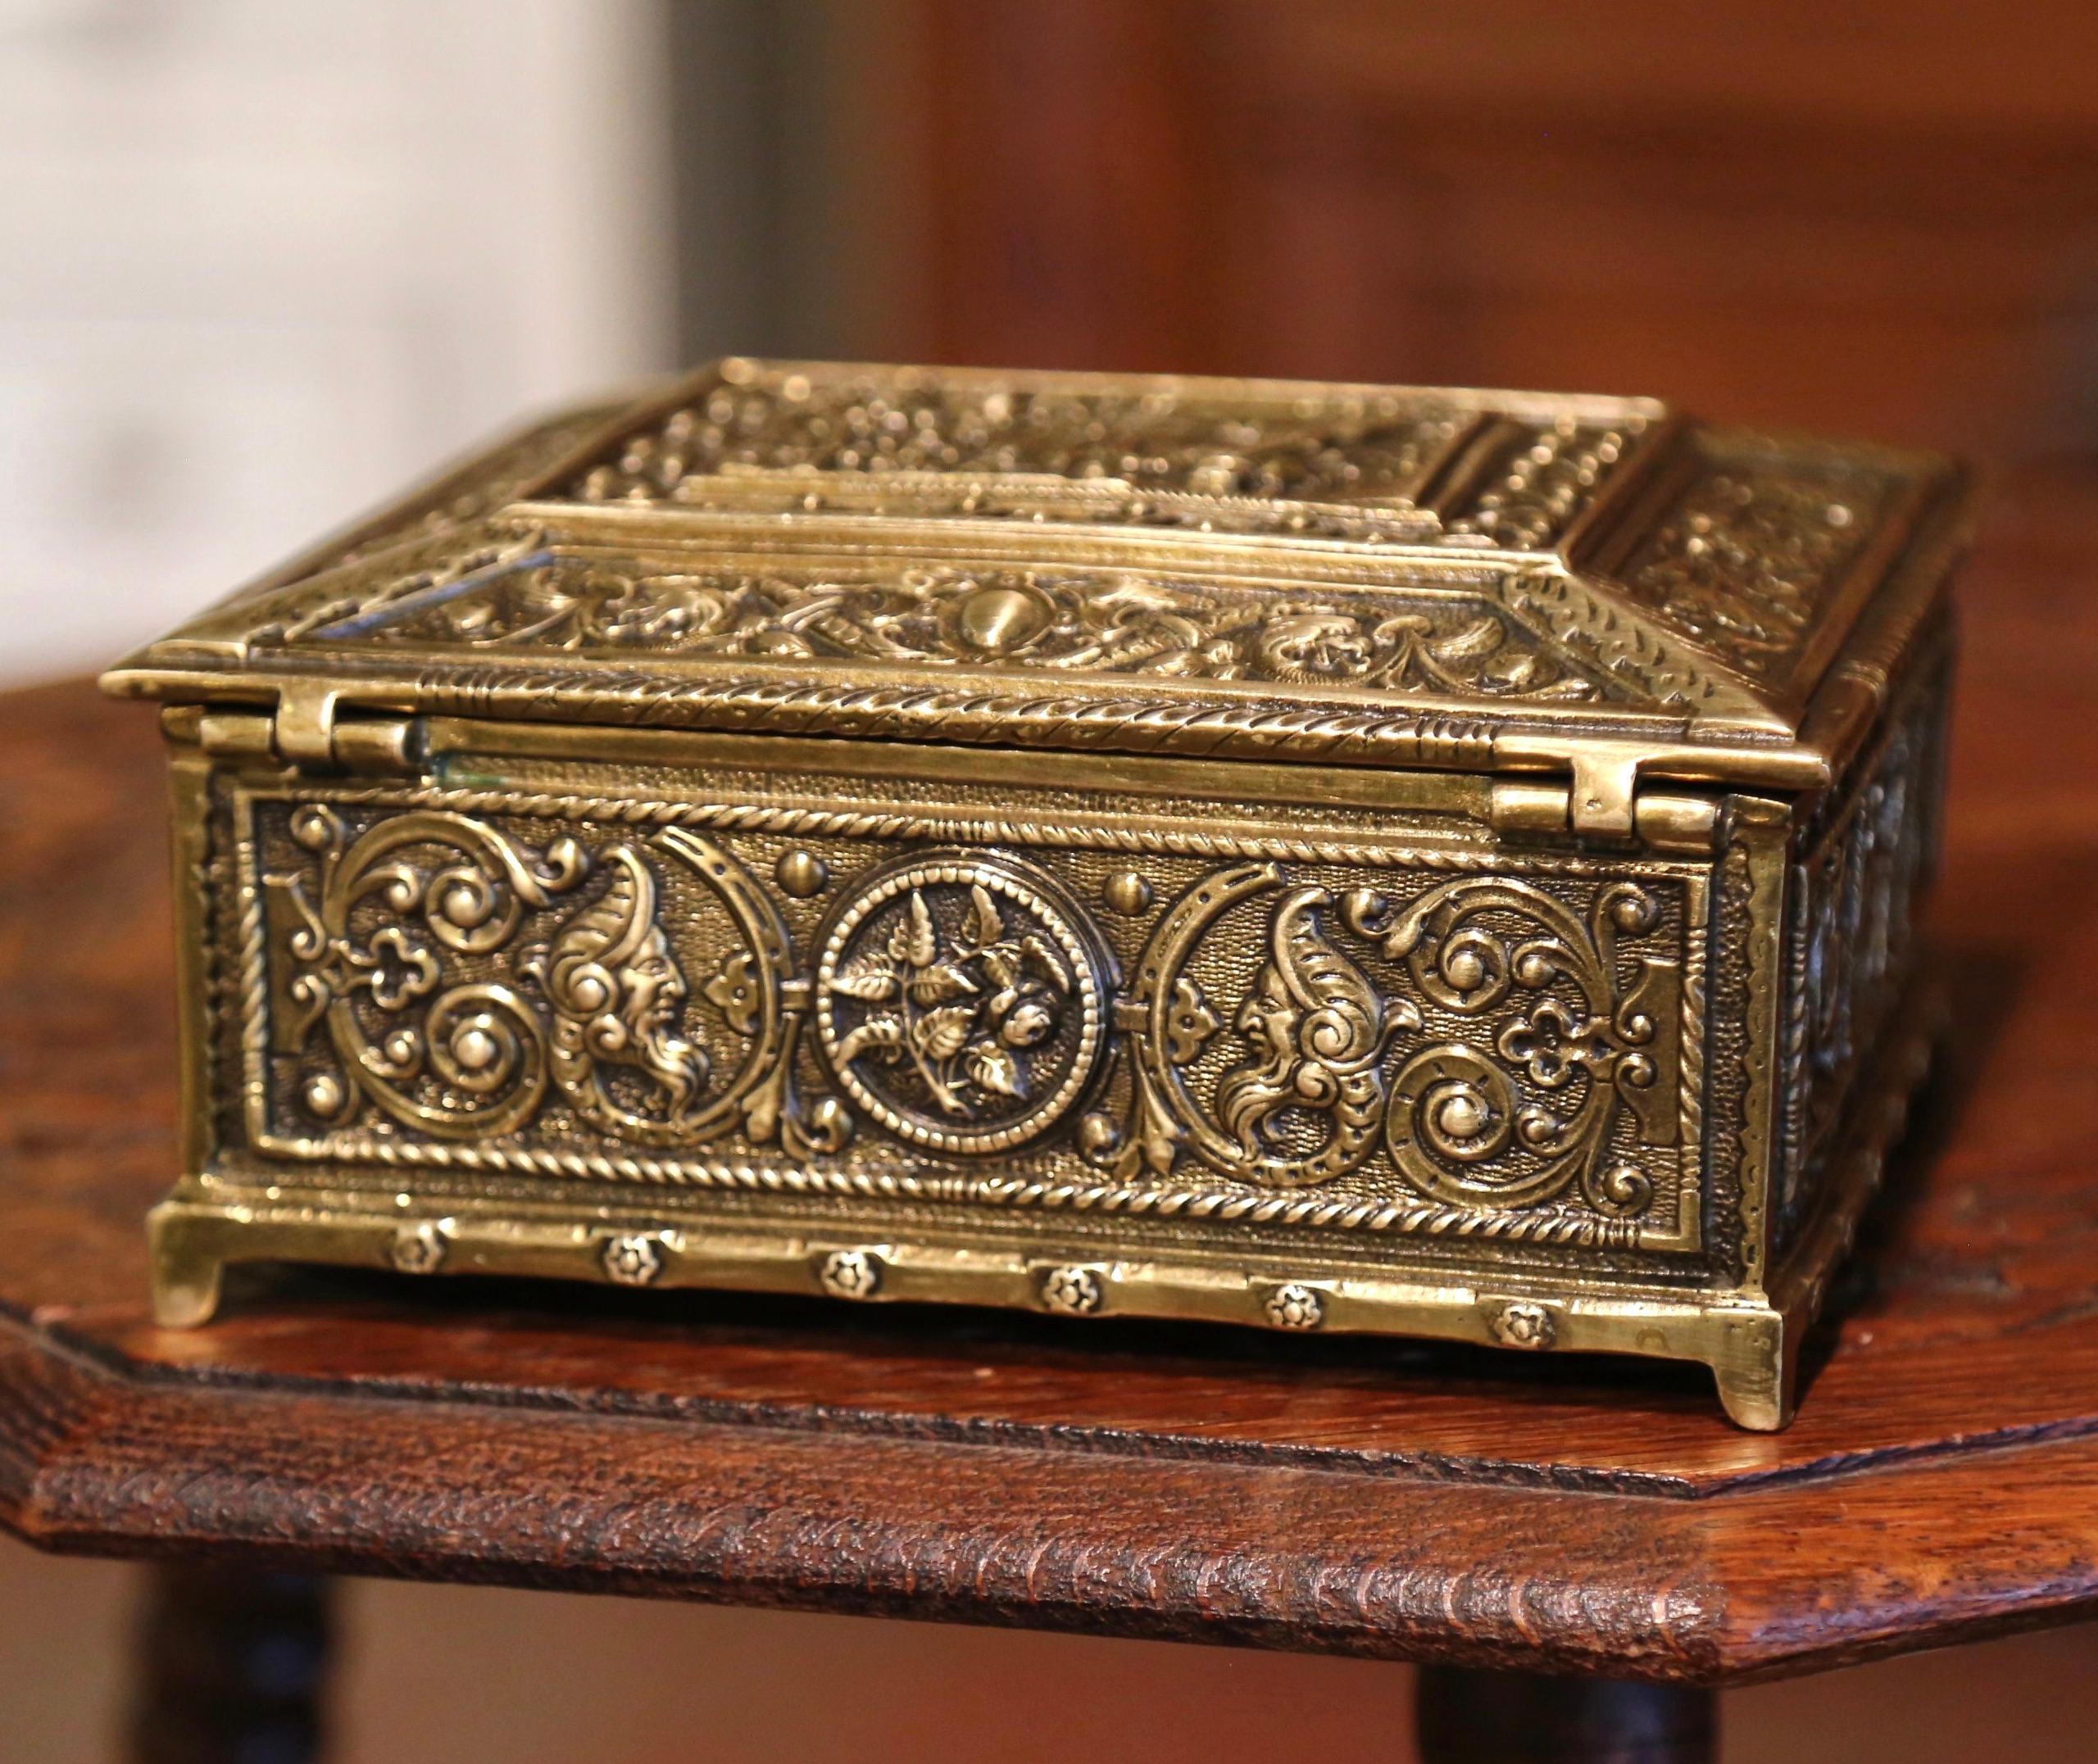 19th-Century Belgian Patinated Bronze Jewelry Box with Medieval Court Decor 1